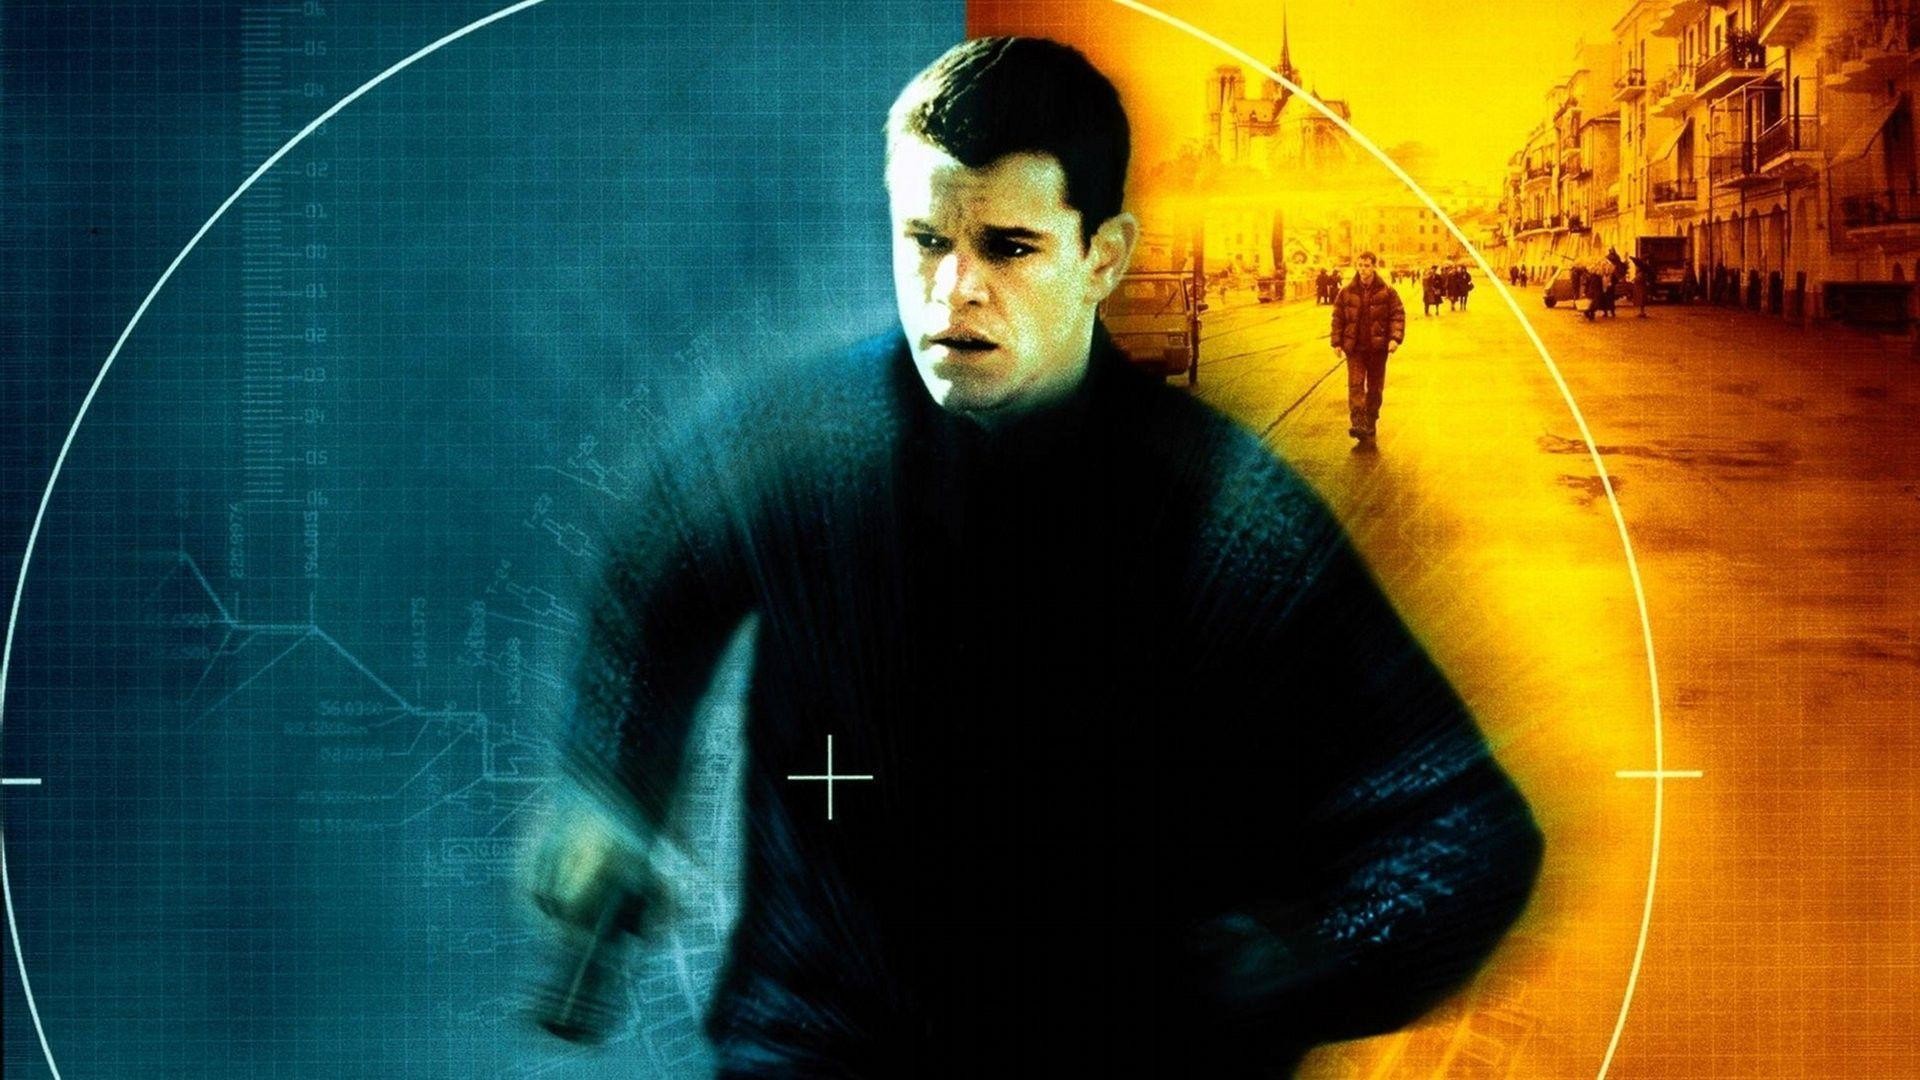 1920x1080 Bourne Identity Wallpaper - Viewing Gallery